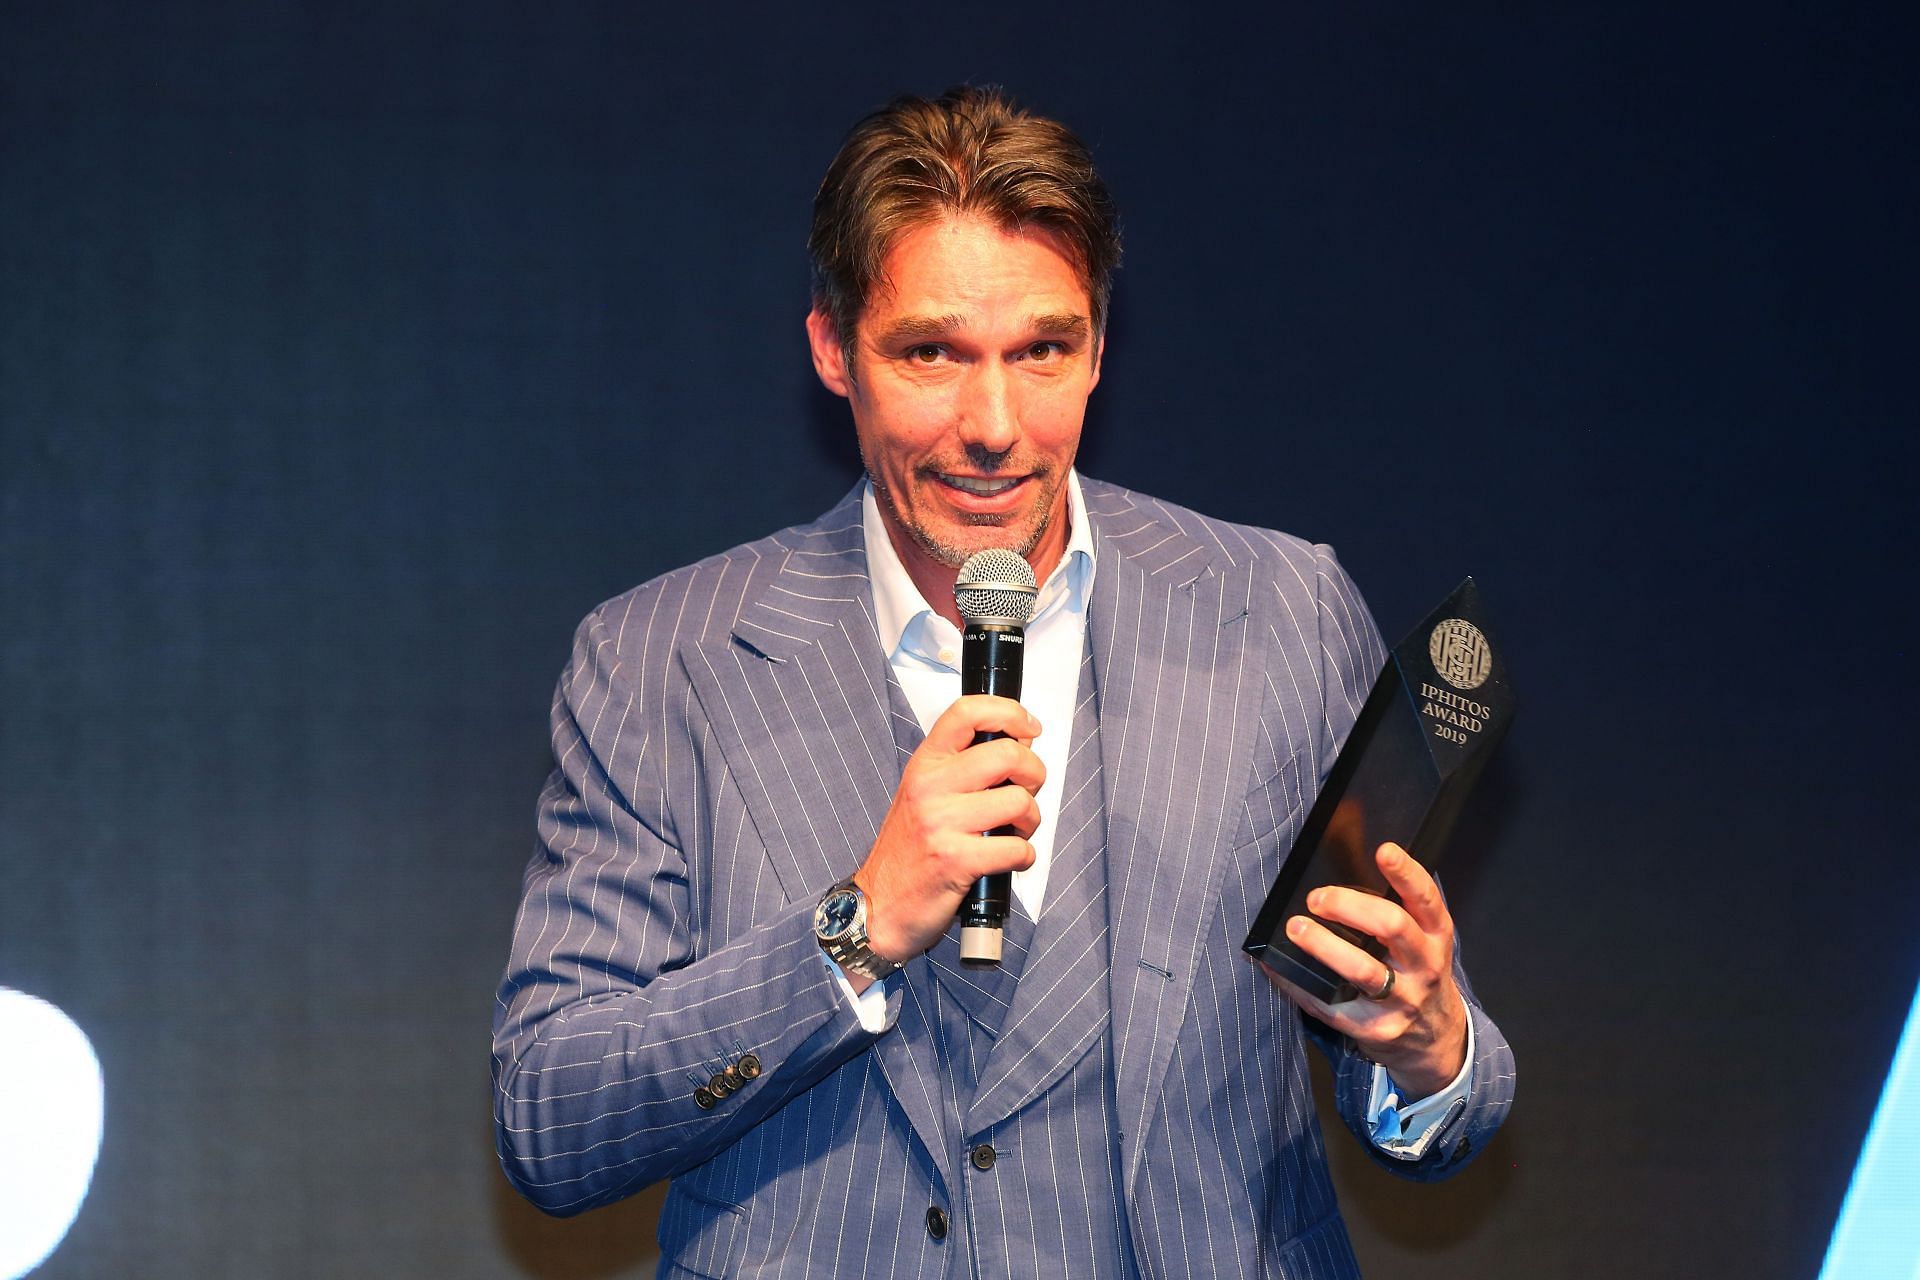 Michael Stich at an event